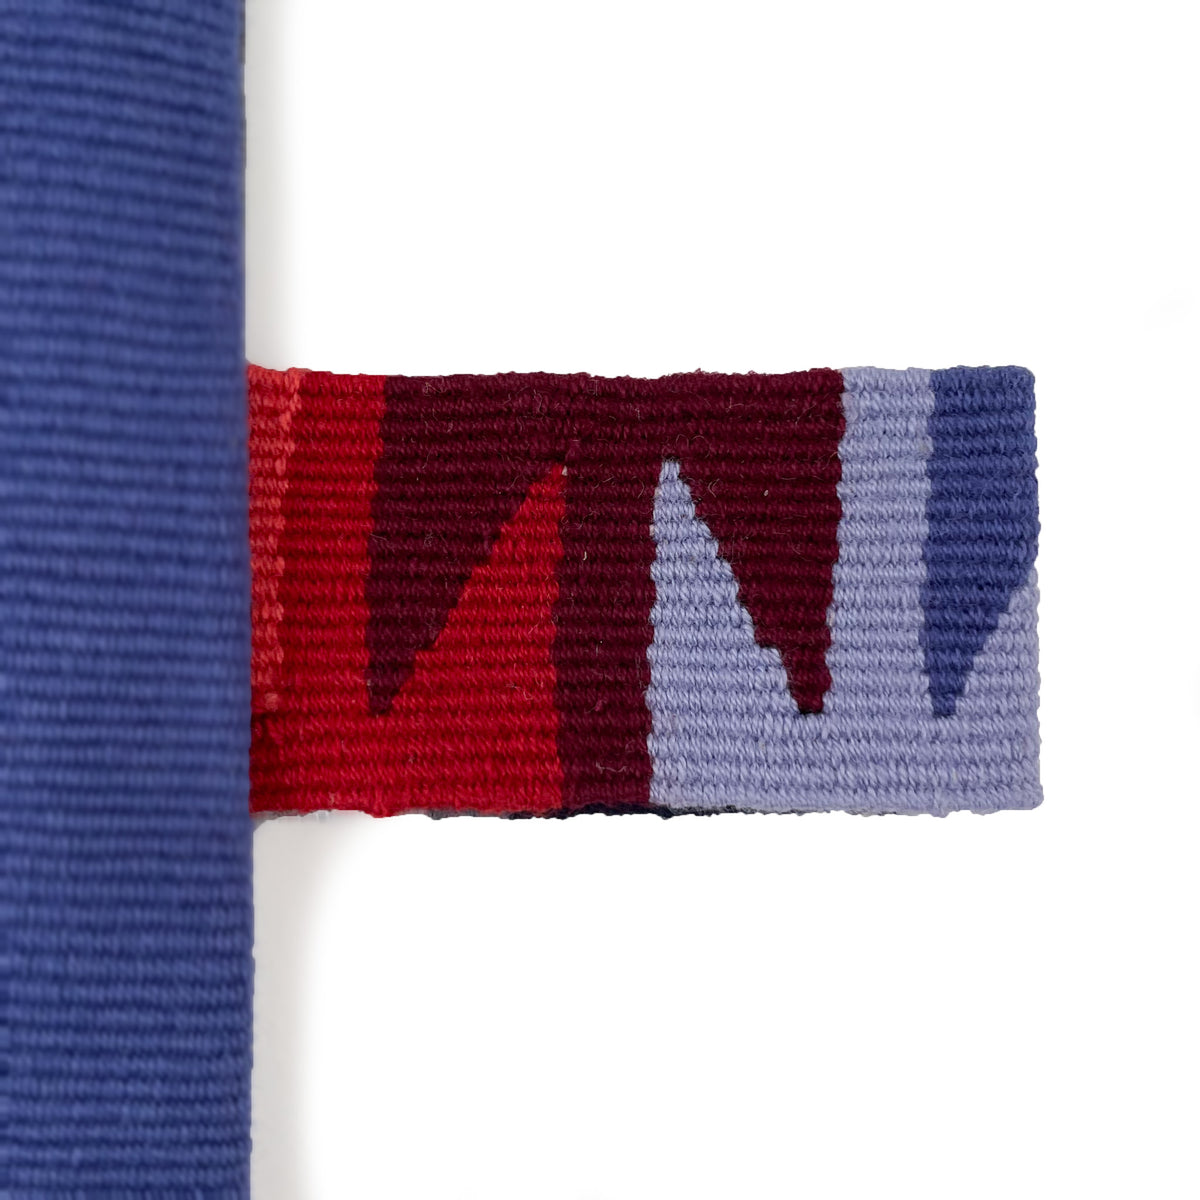 Closeup of handwoven cinta tag in red and blue tones